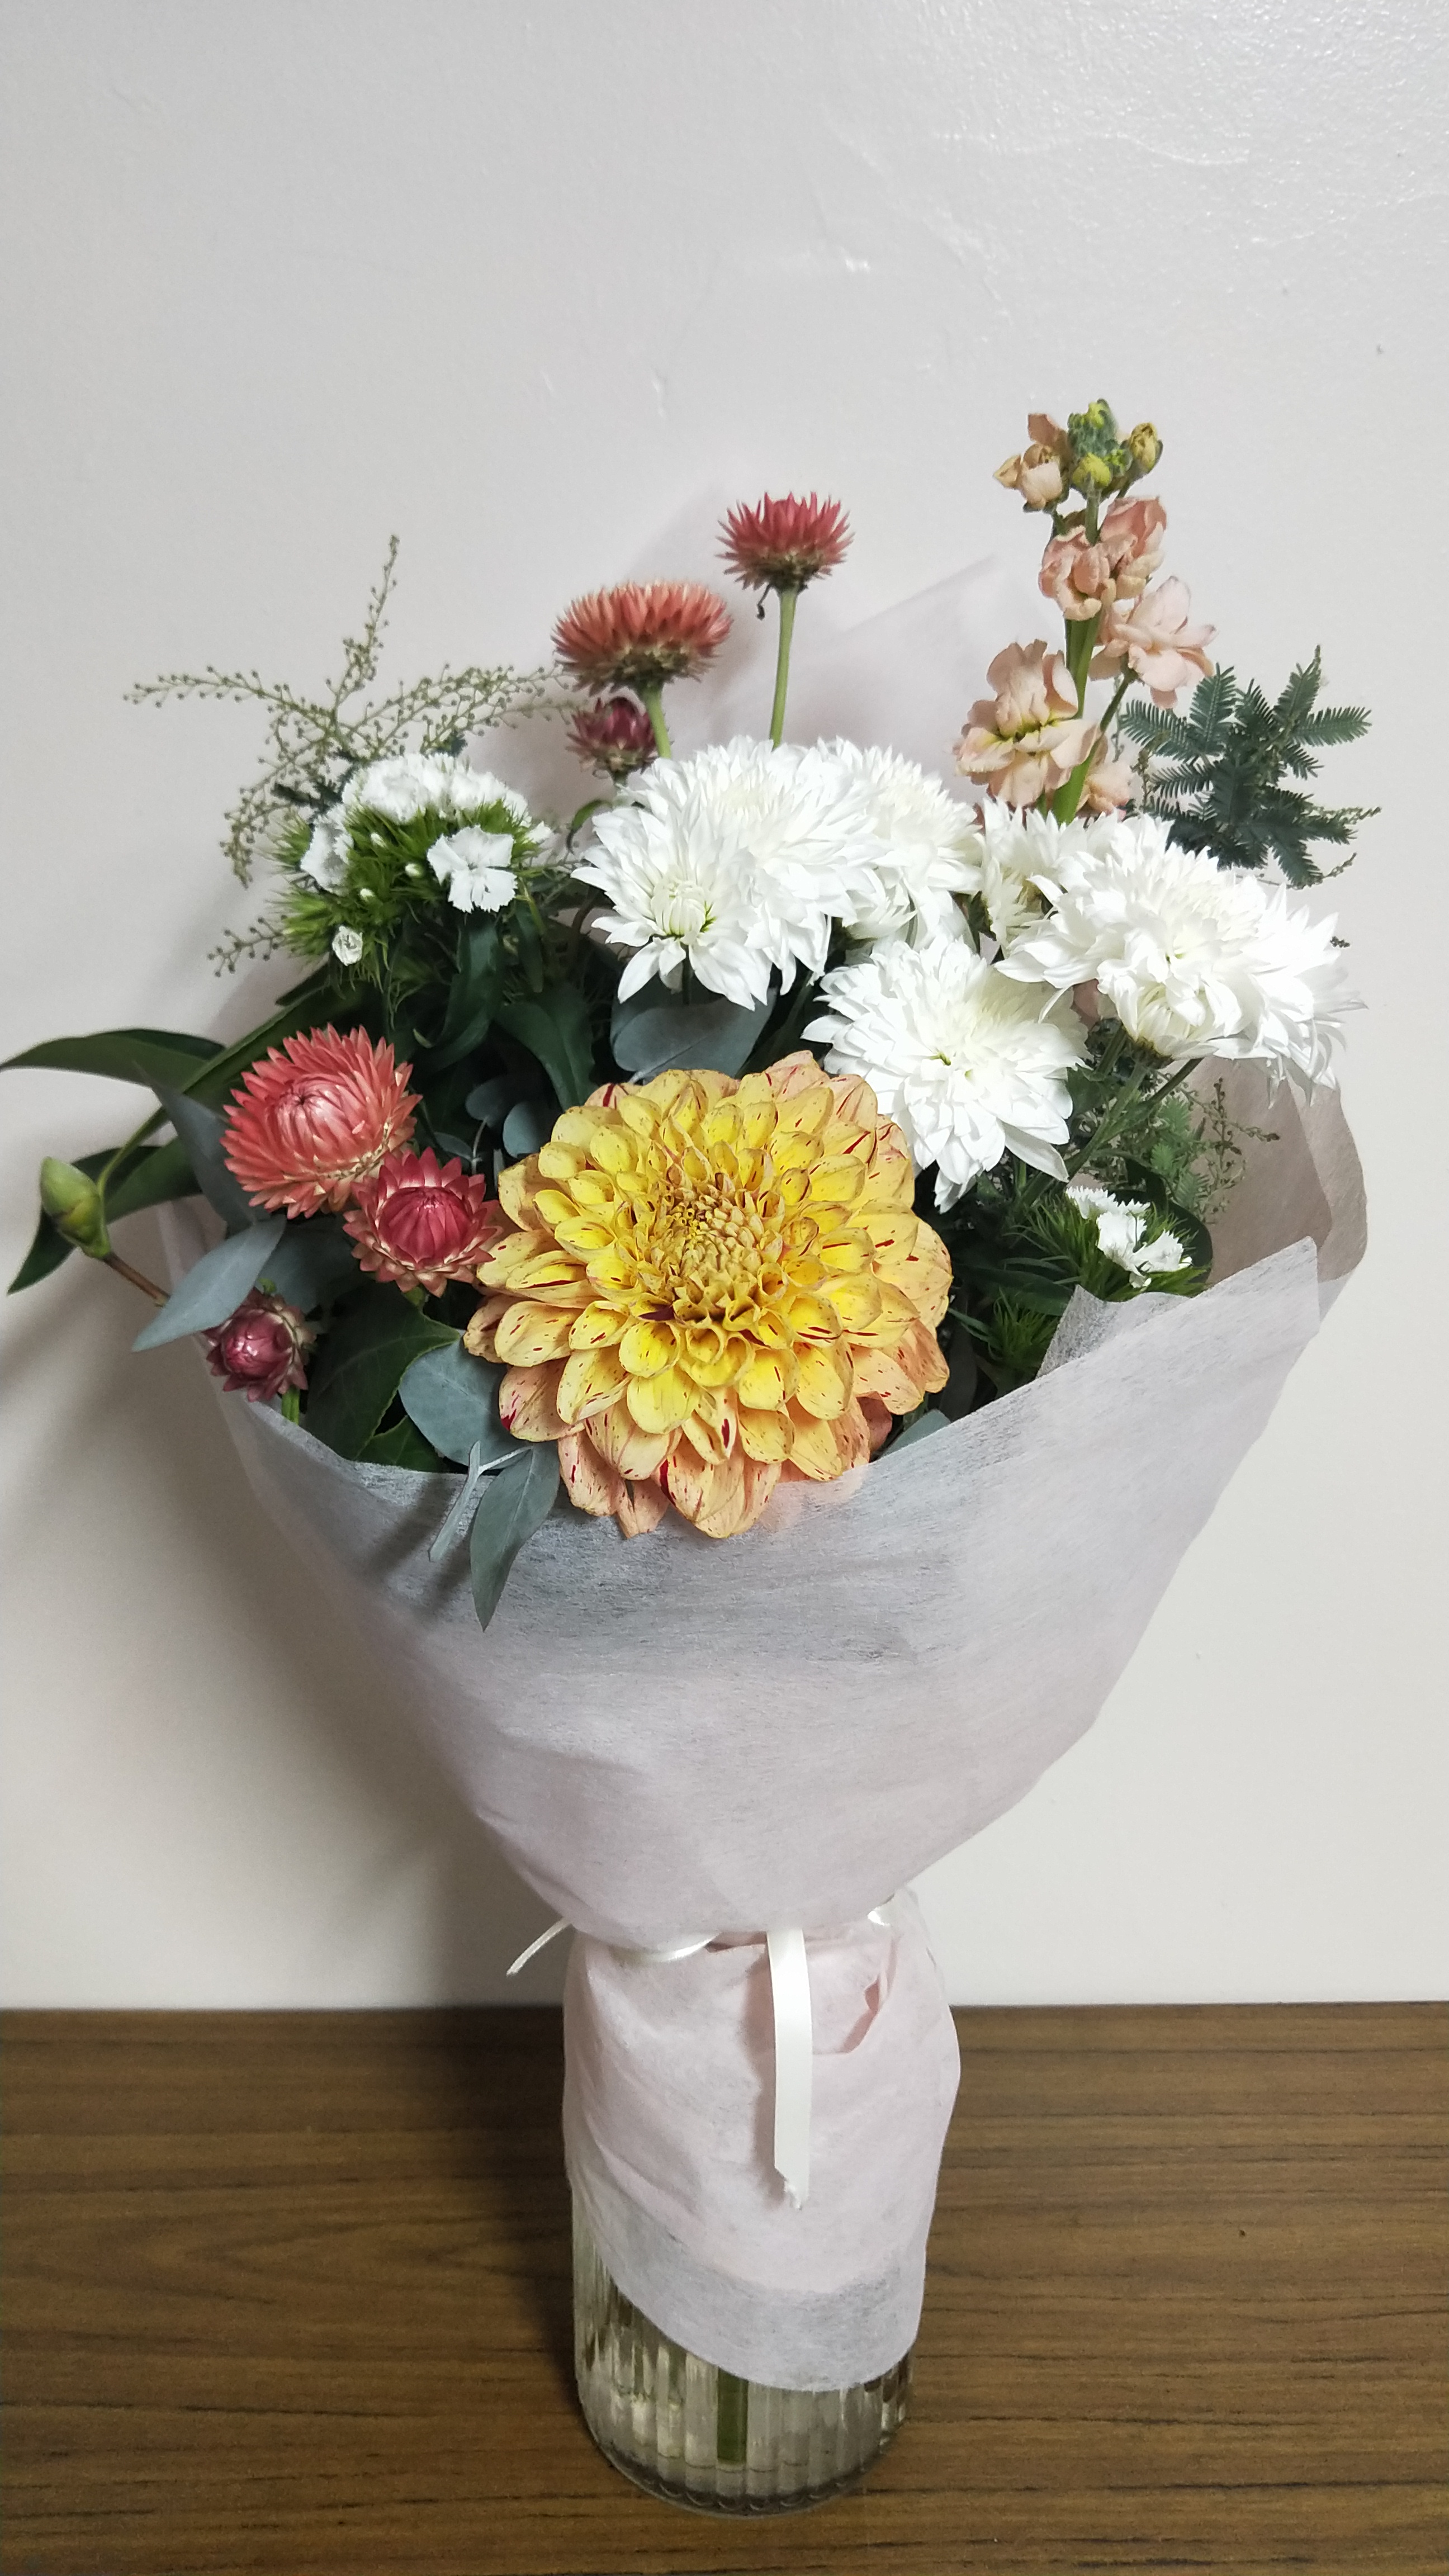 Perfect Day bouquet makes an ideal gift for any occasion.